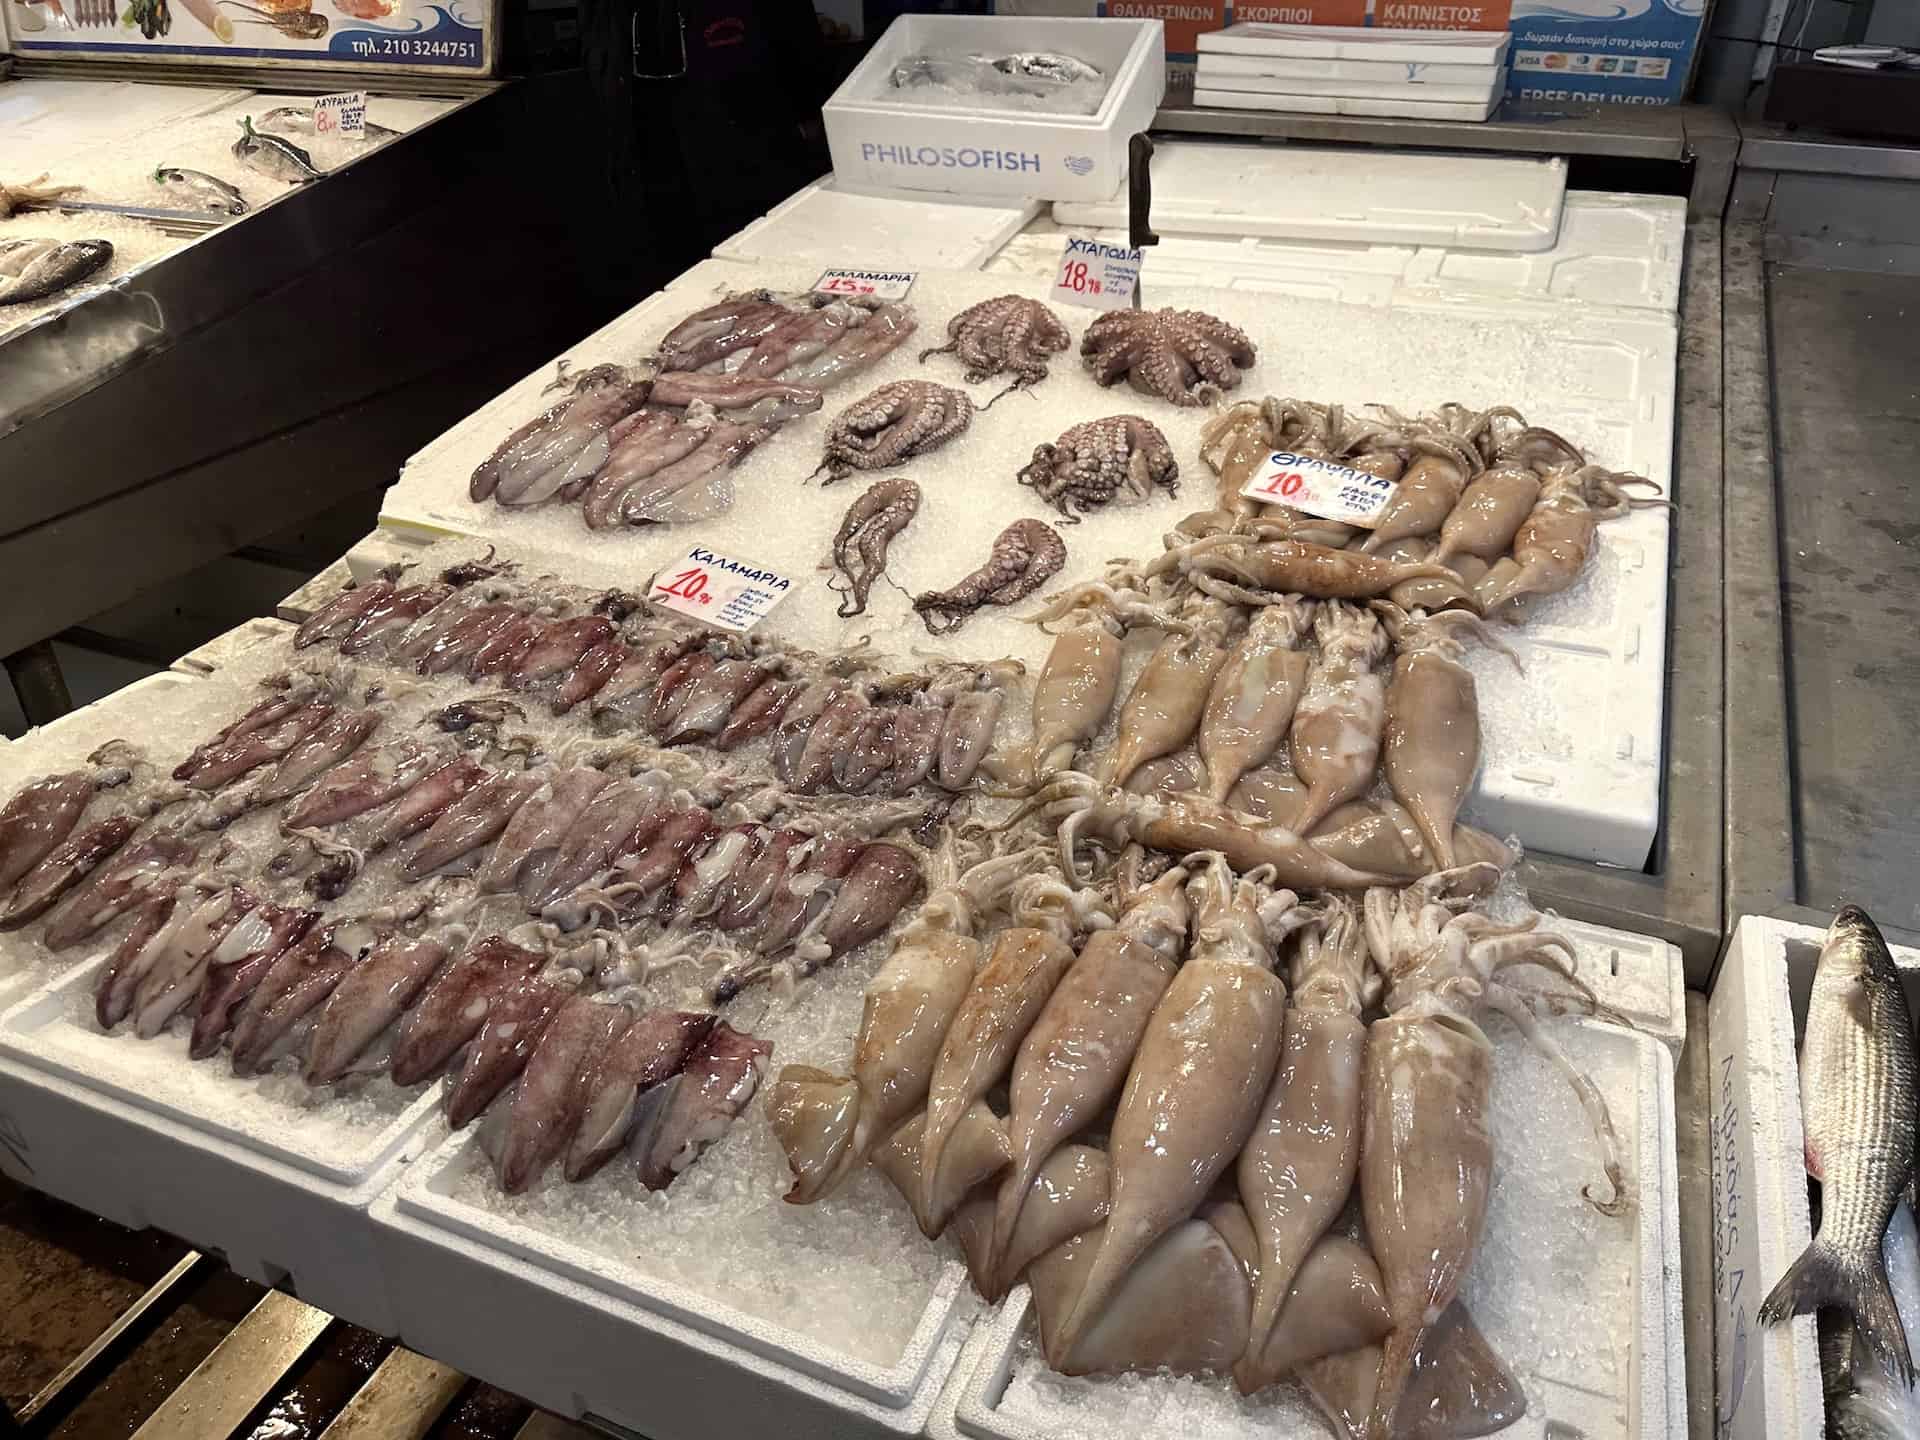 Squid at the fish market at Varvakeios Agora in Athens, Greece